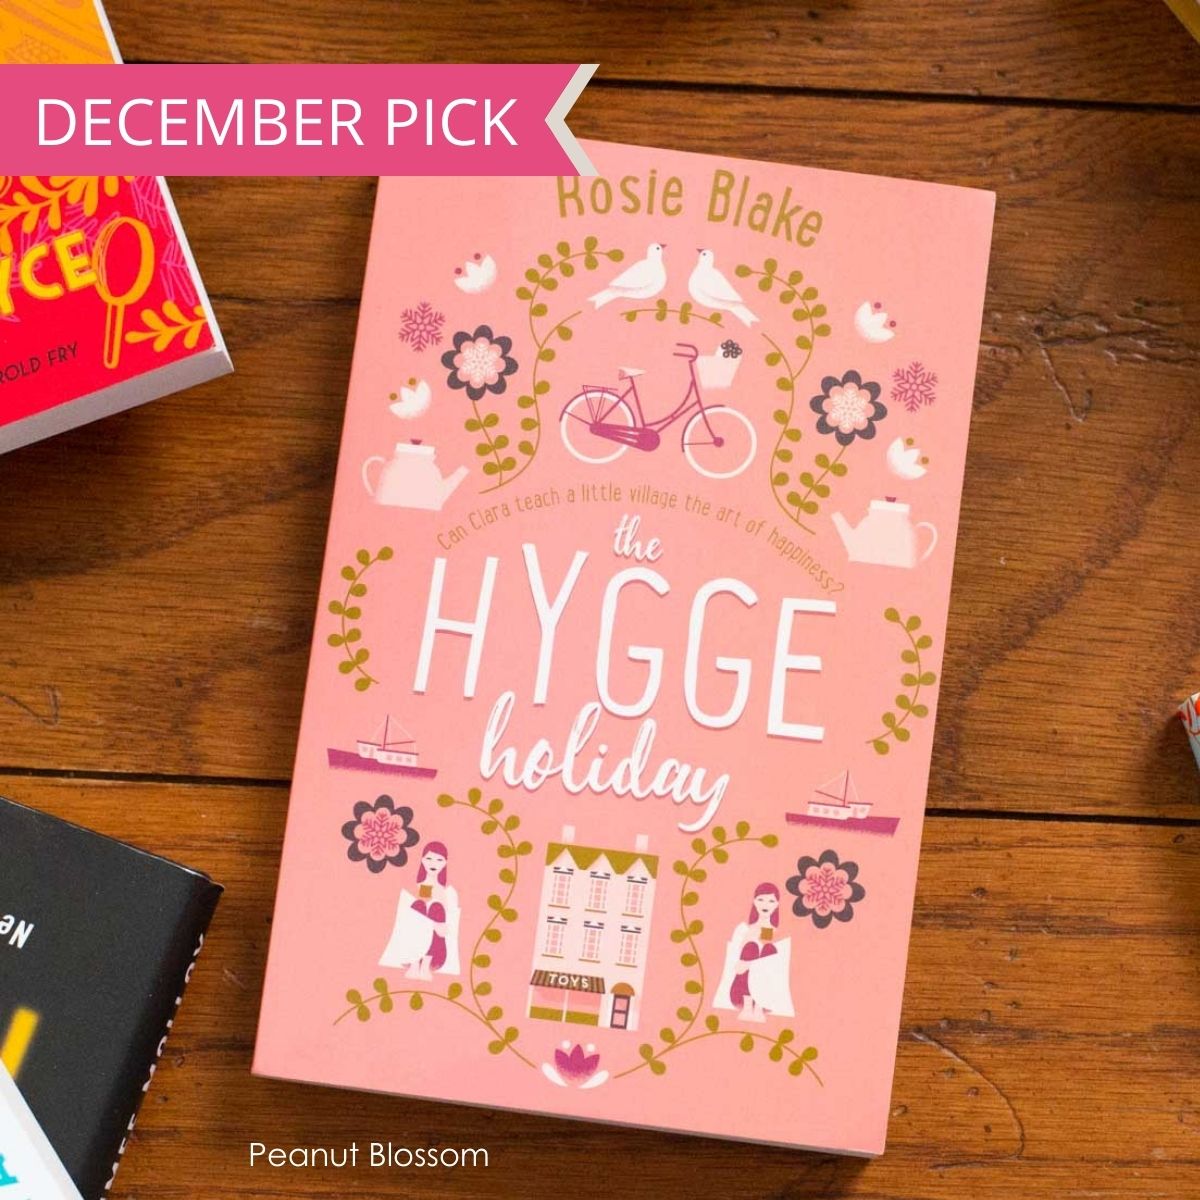 A copy of The Hygge Holiday sits on a table.